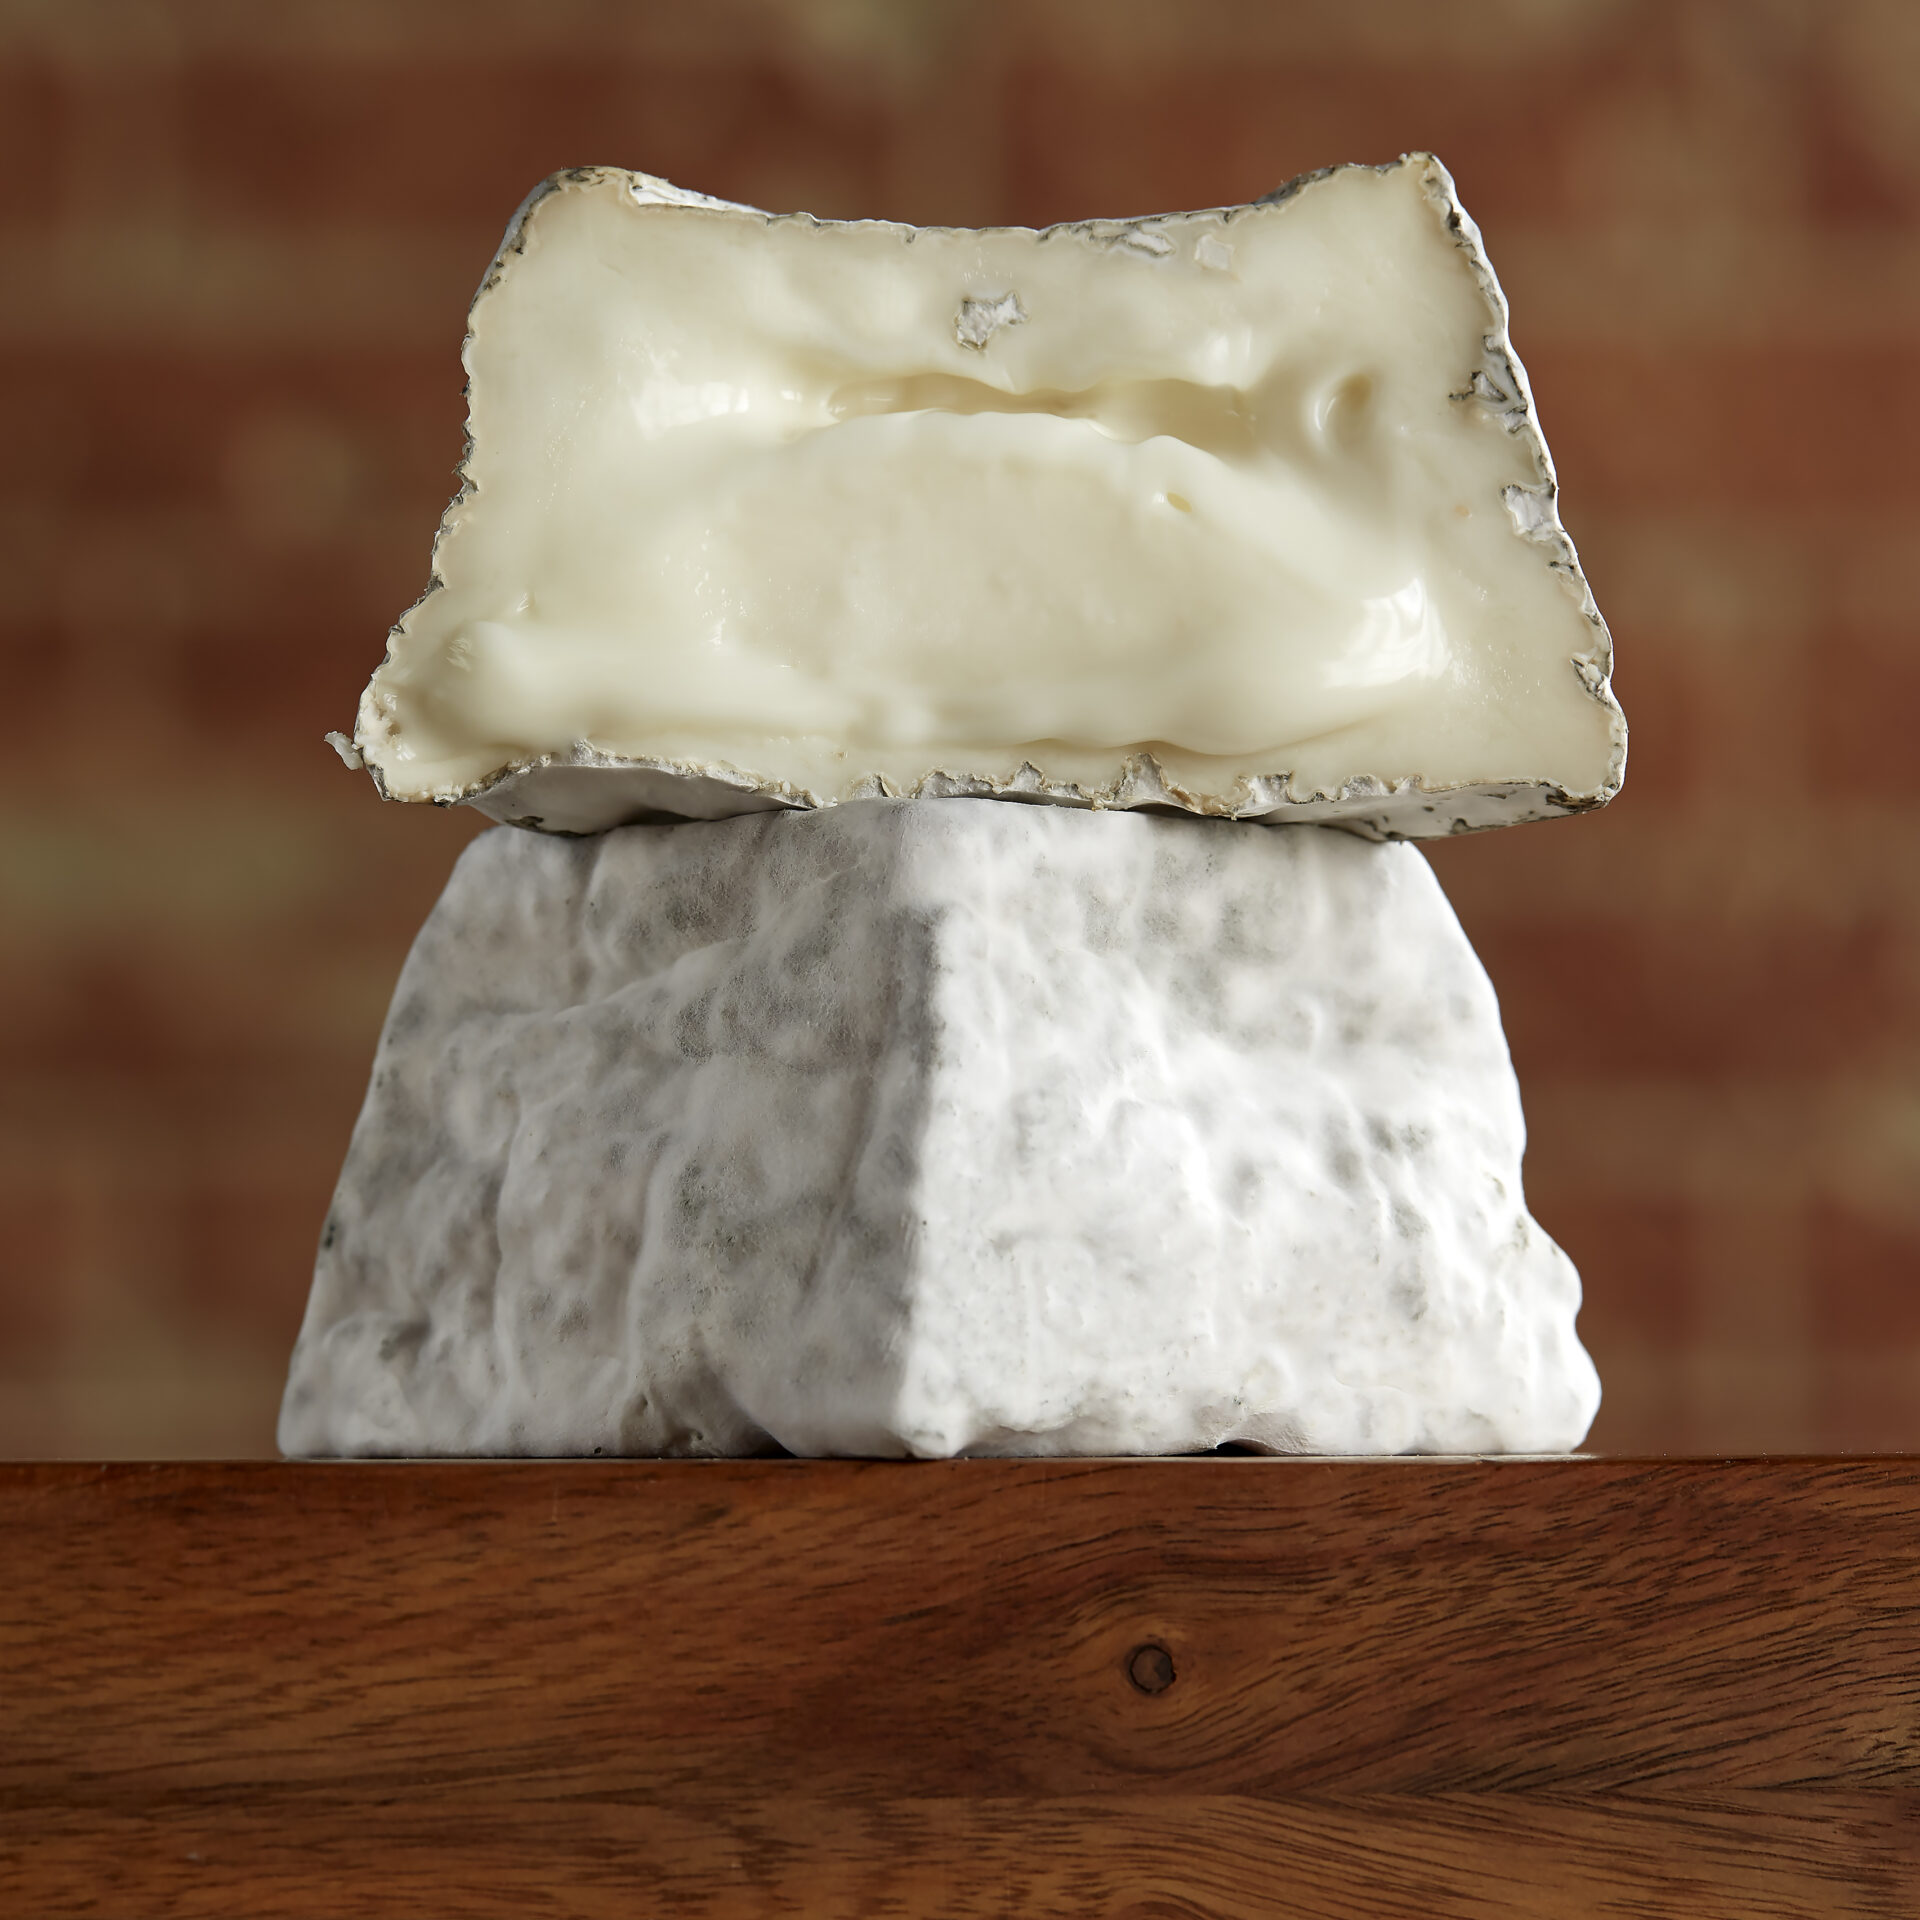 Mountain Top Specialty Cheese from Firefly Farms